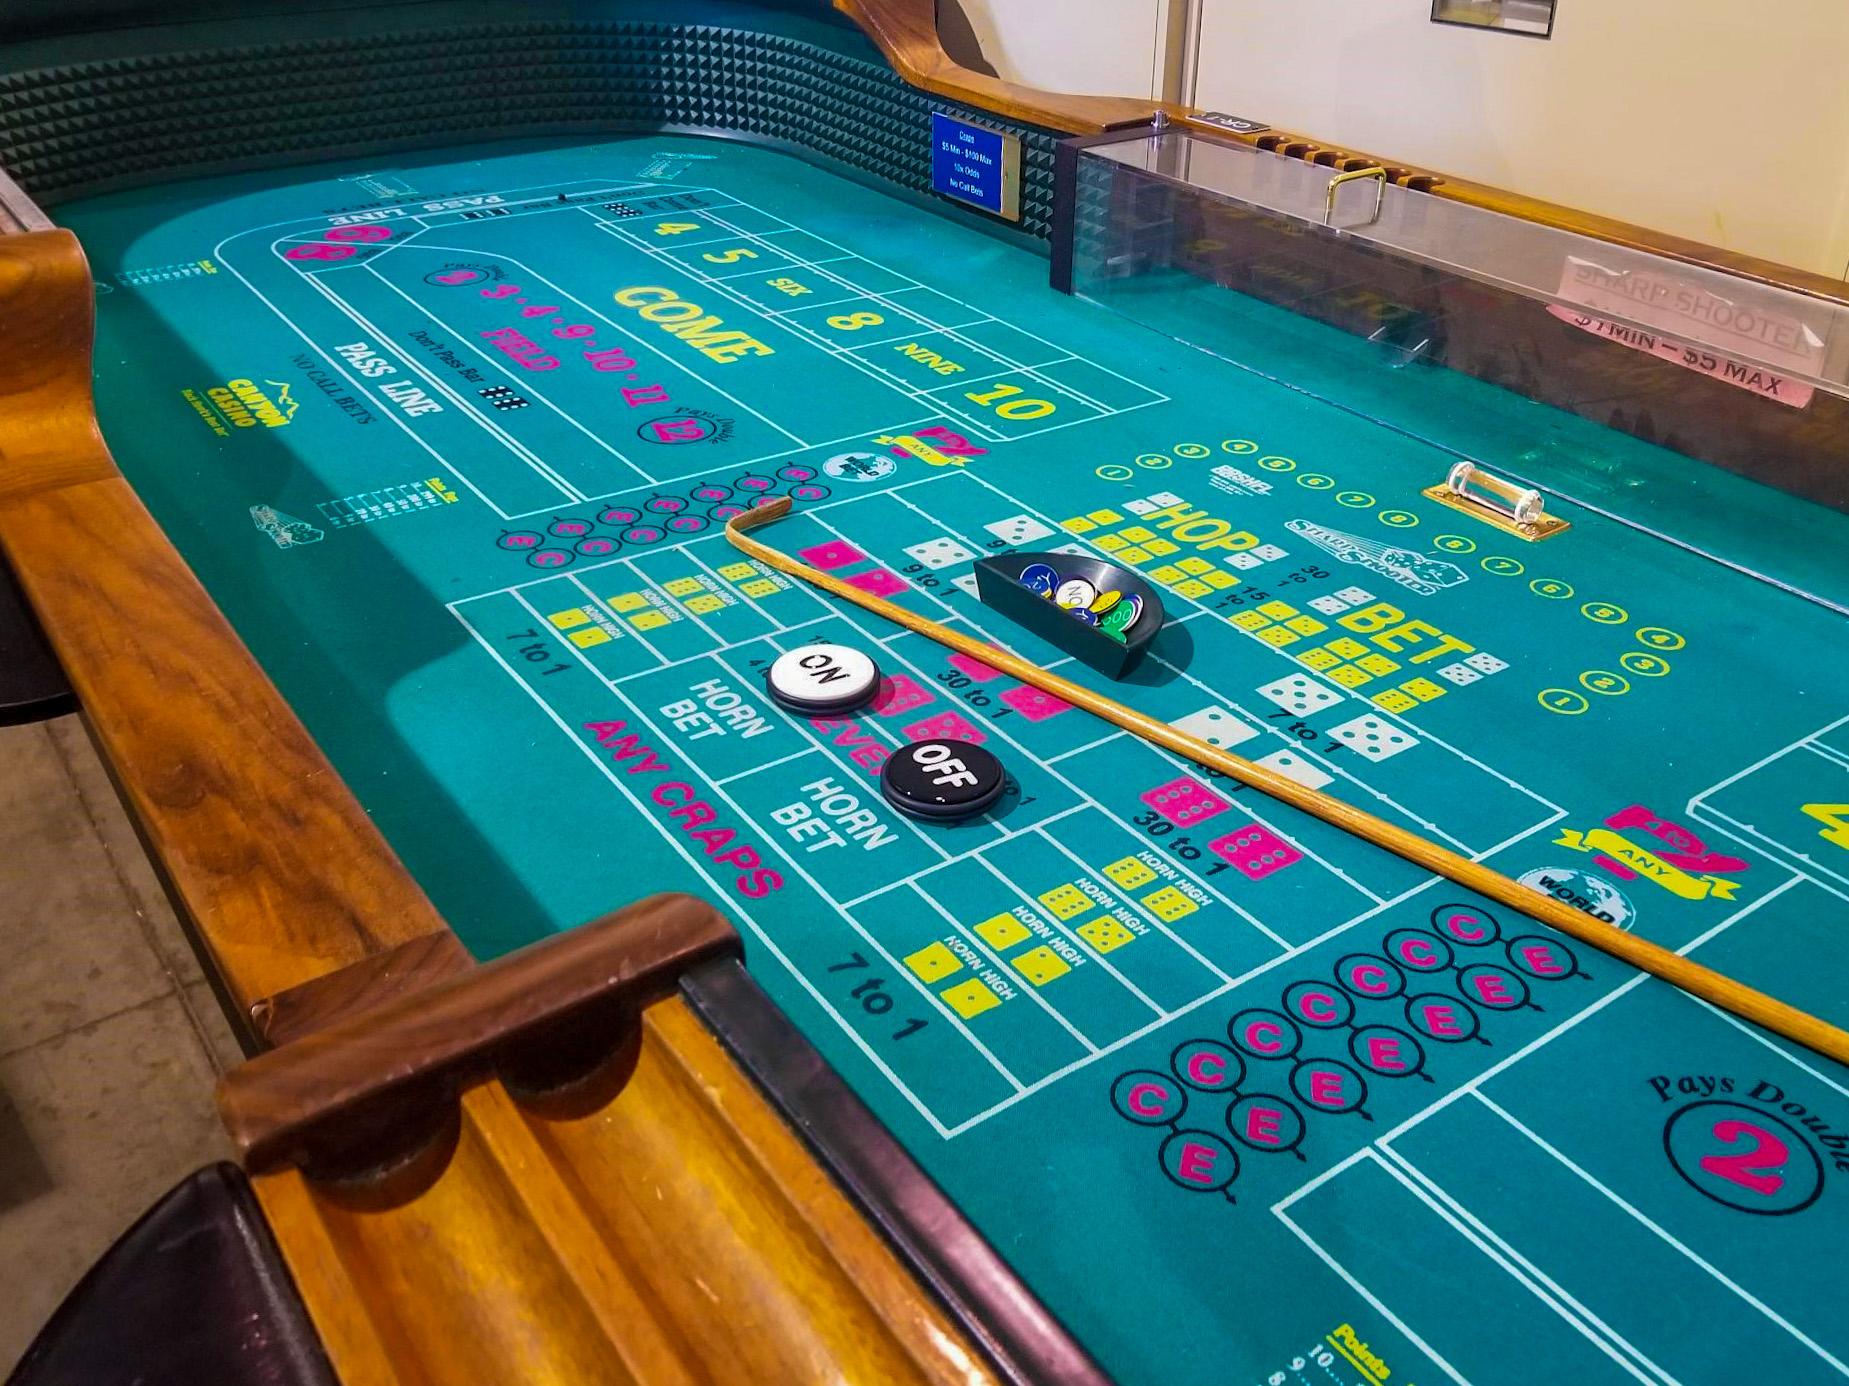 What is the regulation size of a craps table rules